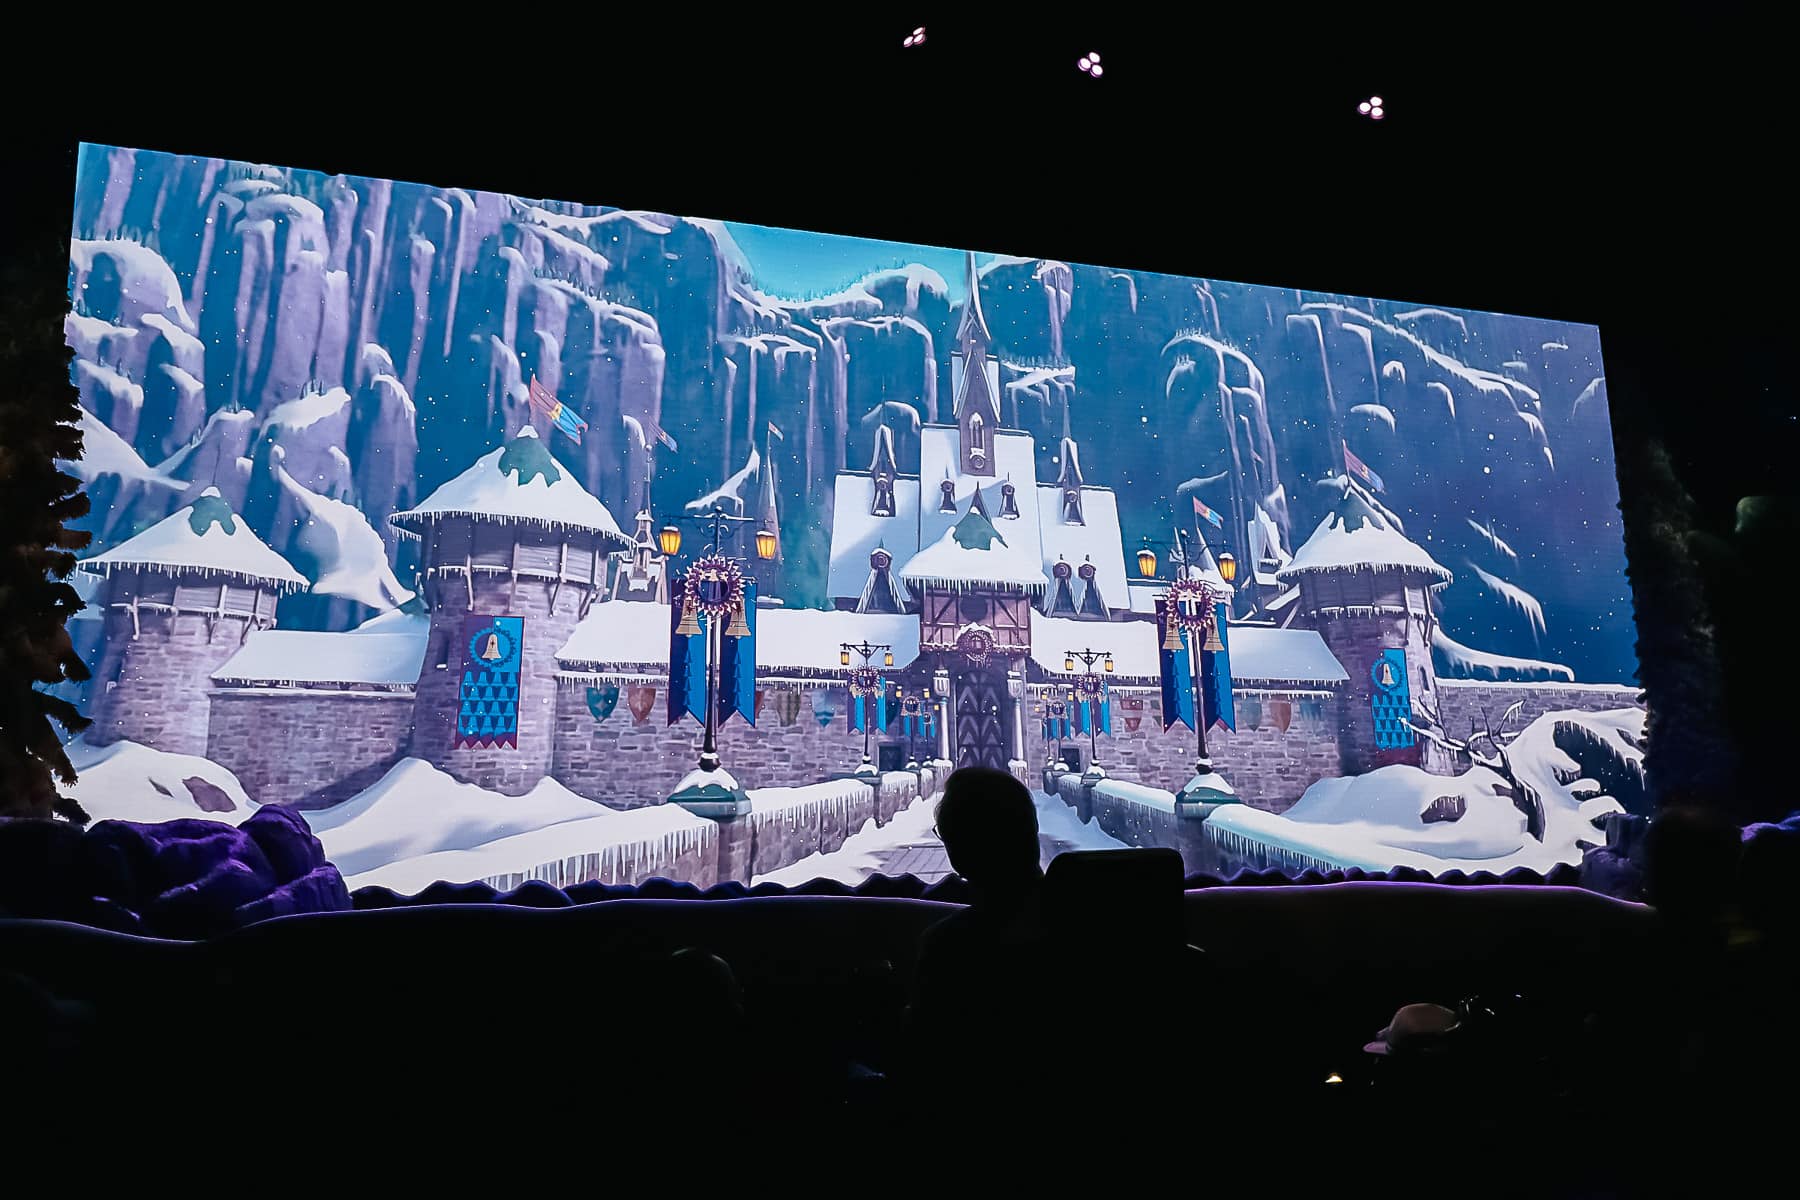 Arendelle on the screen as the show begins. 